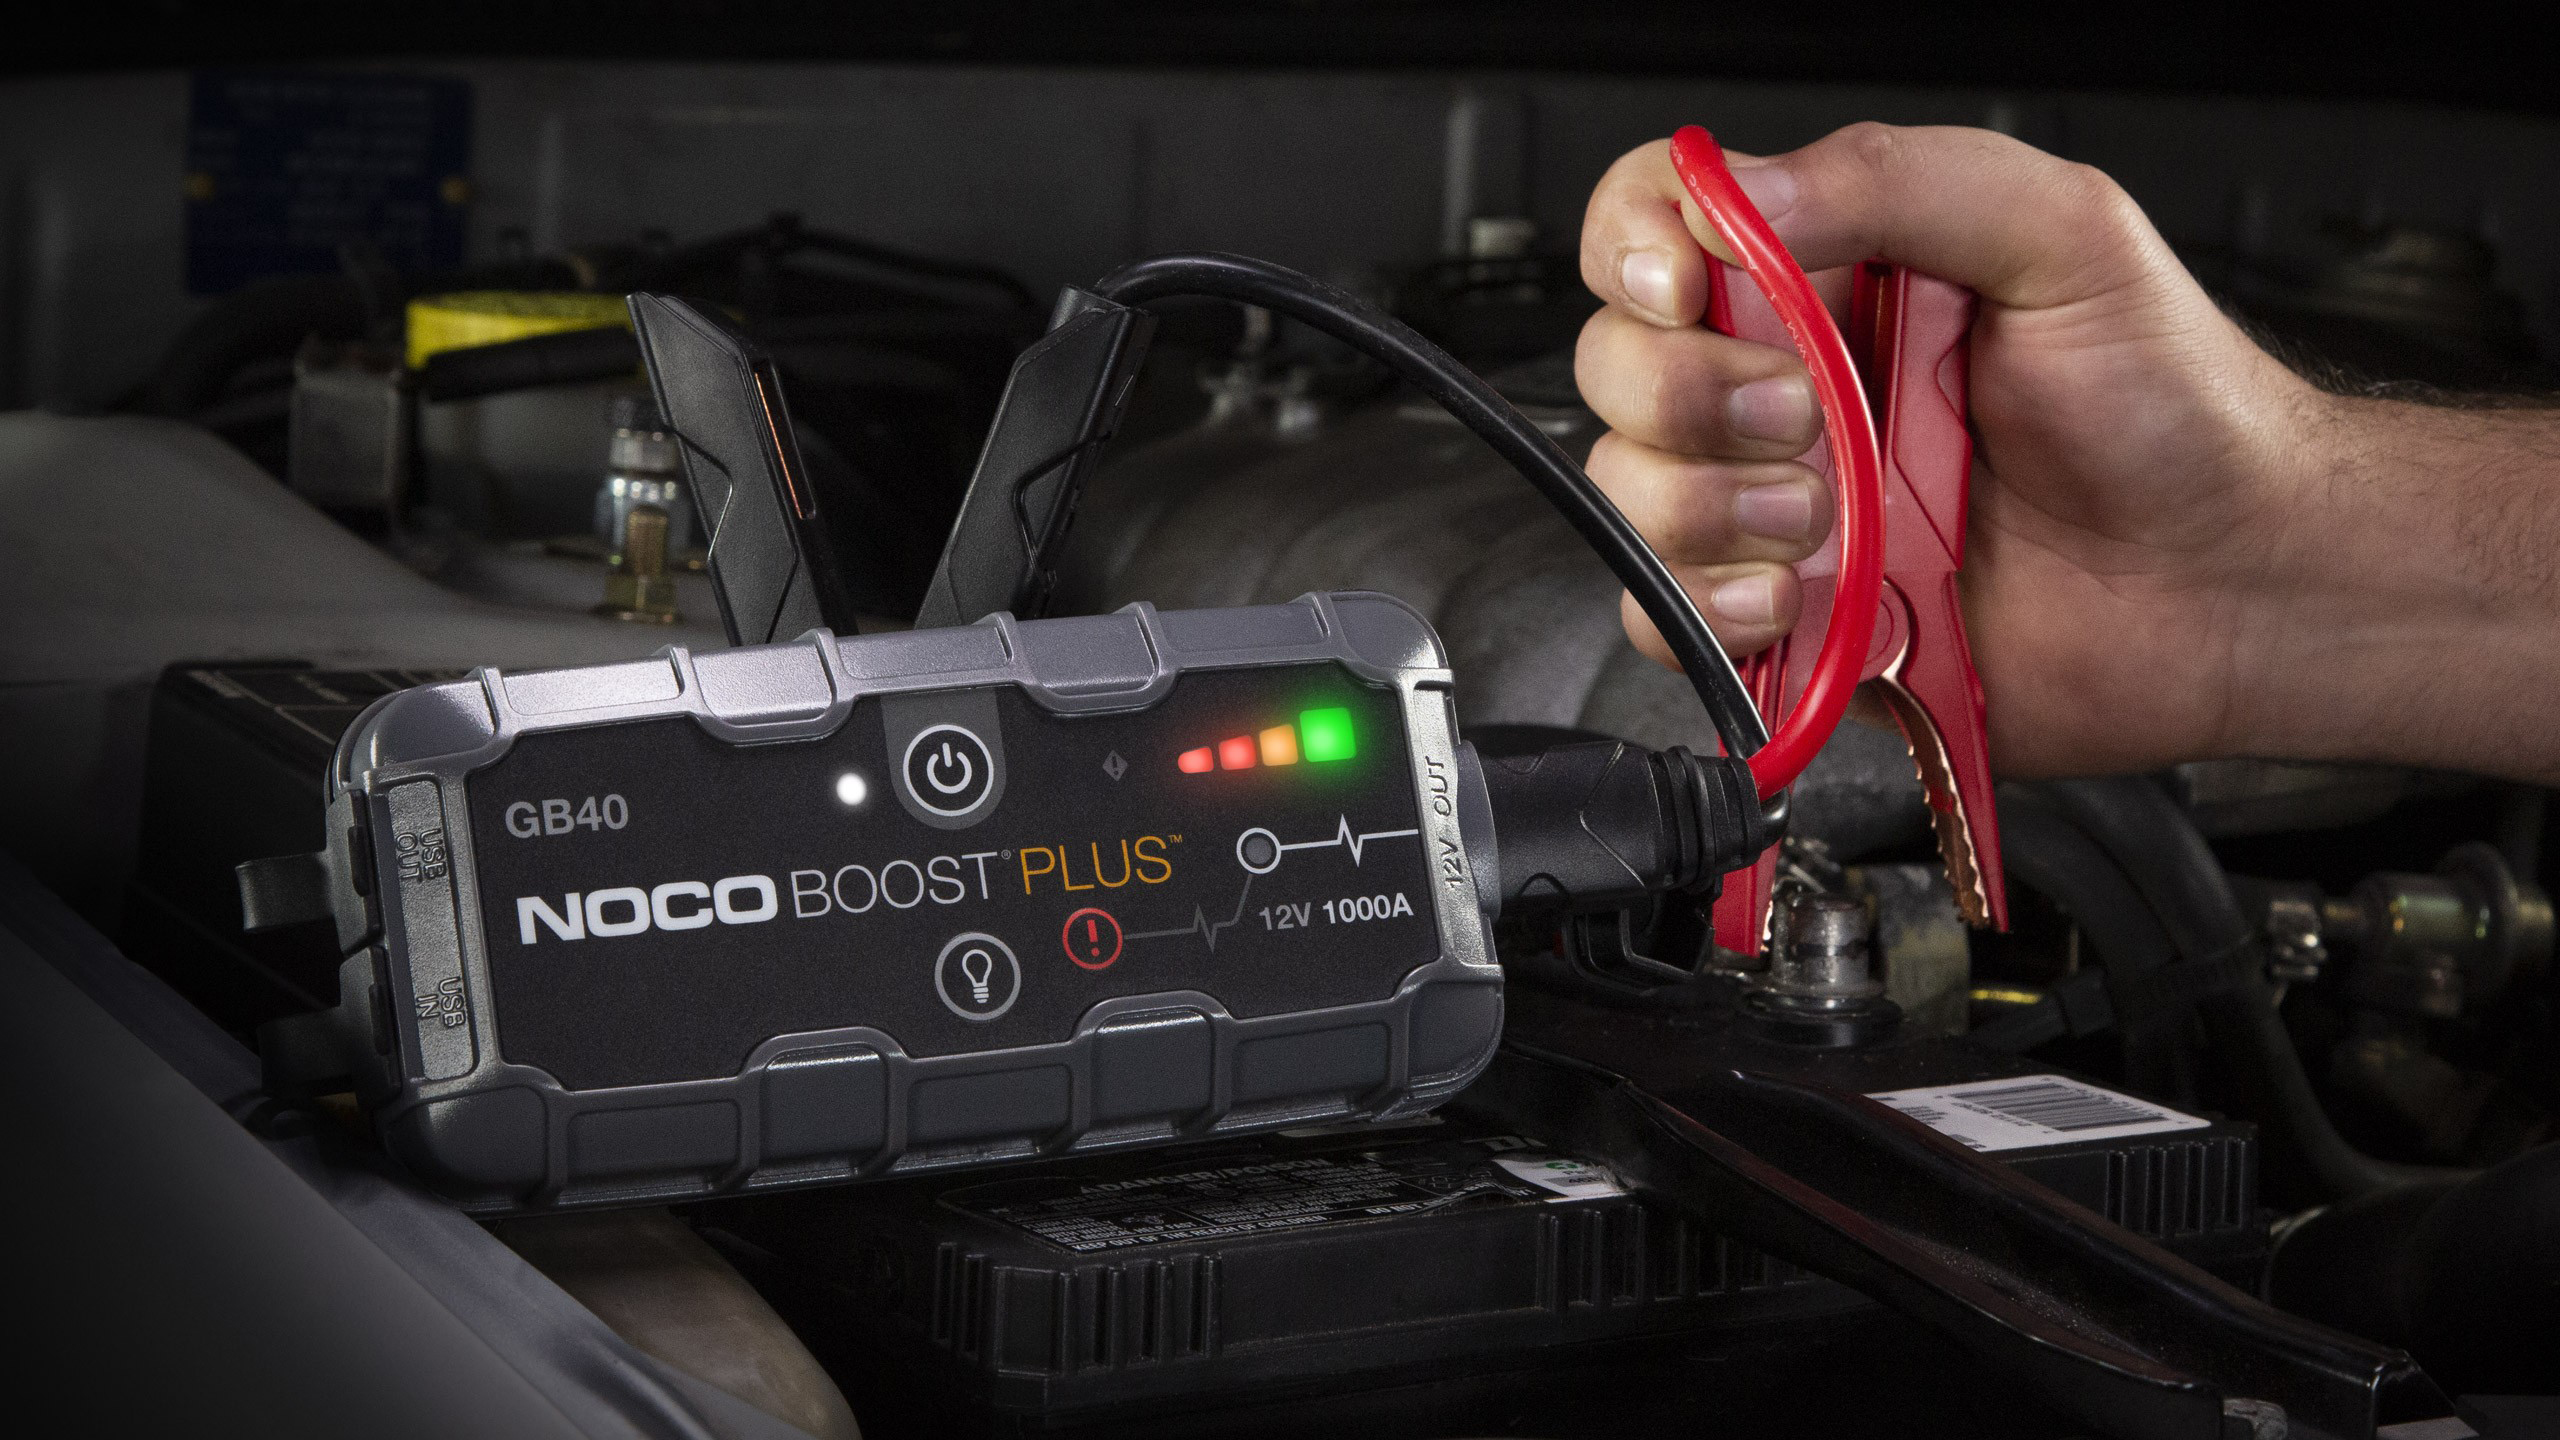 Noco Boost Plus GB40 Jump Starter: powerful and portable but practical too